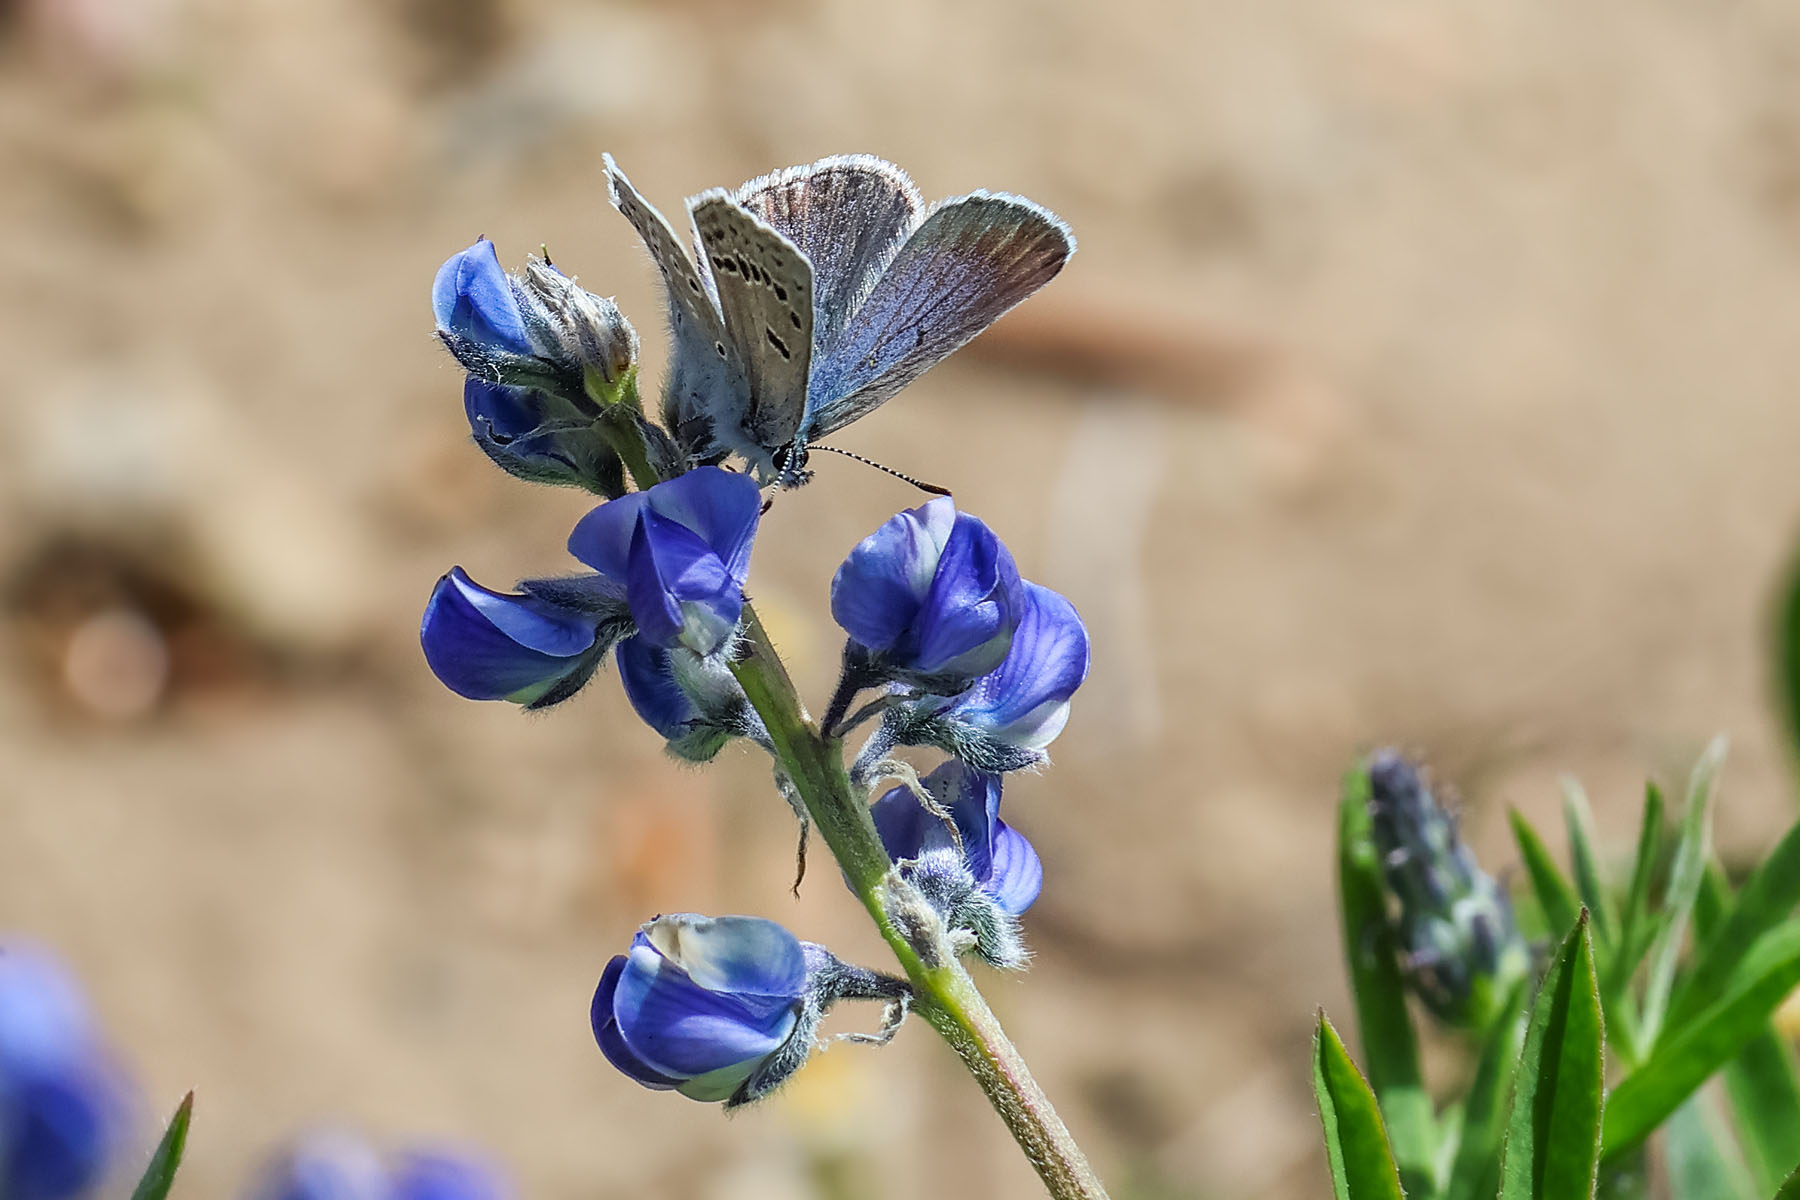 Little butterfly on flowers at Vista Point, Beartooth Highway, Montana.  Click for next photo.